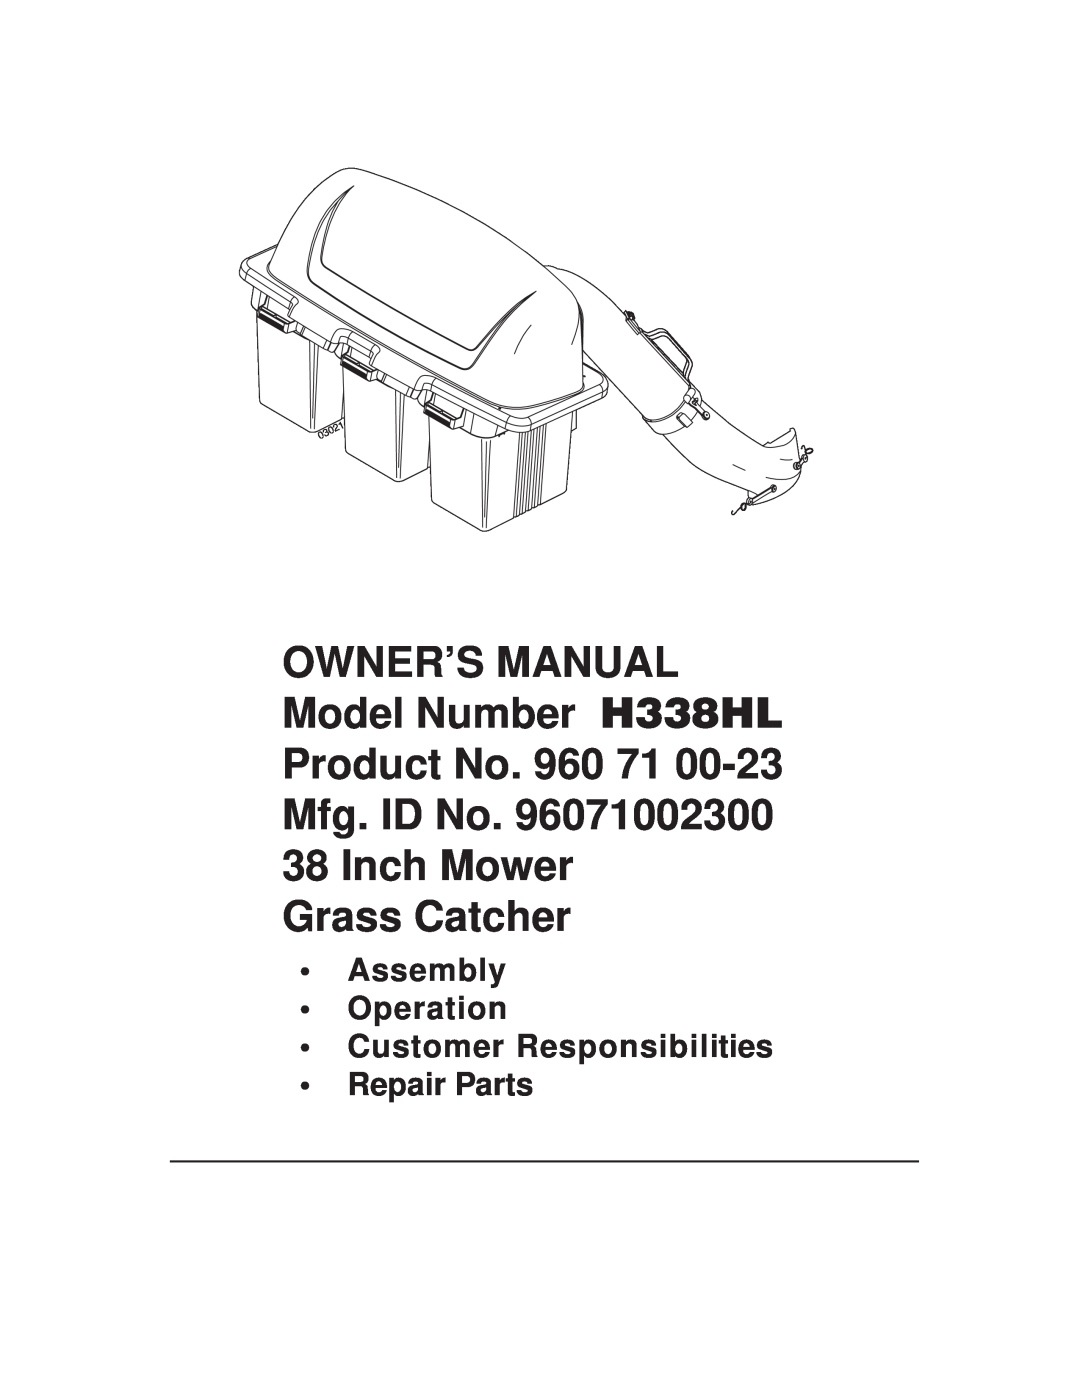 McCulloch 96071002300, H338HL owner manual Product No. 960 71 Mfg. ID No. 38 Inch Mower, Grass Catcher, Repair Parts 